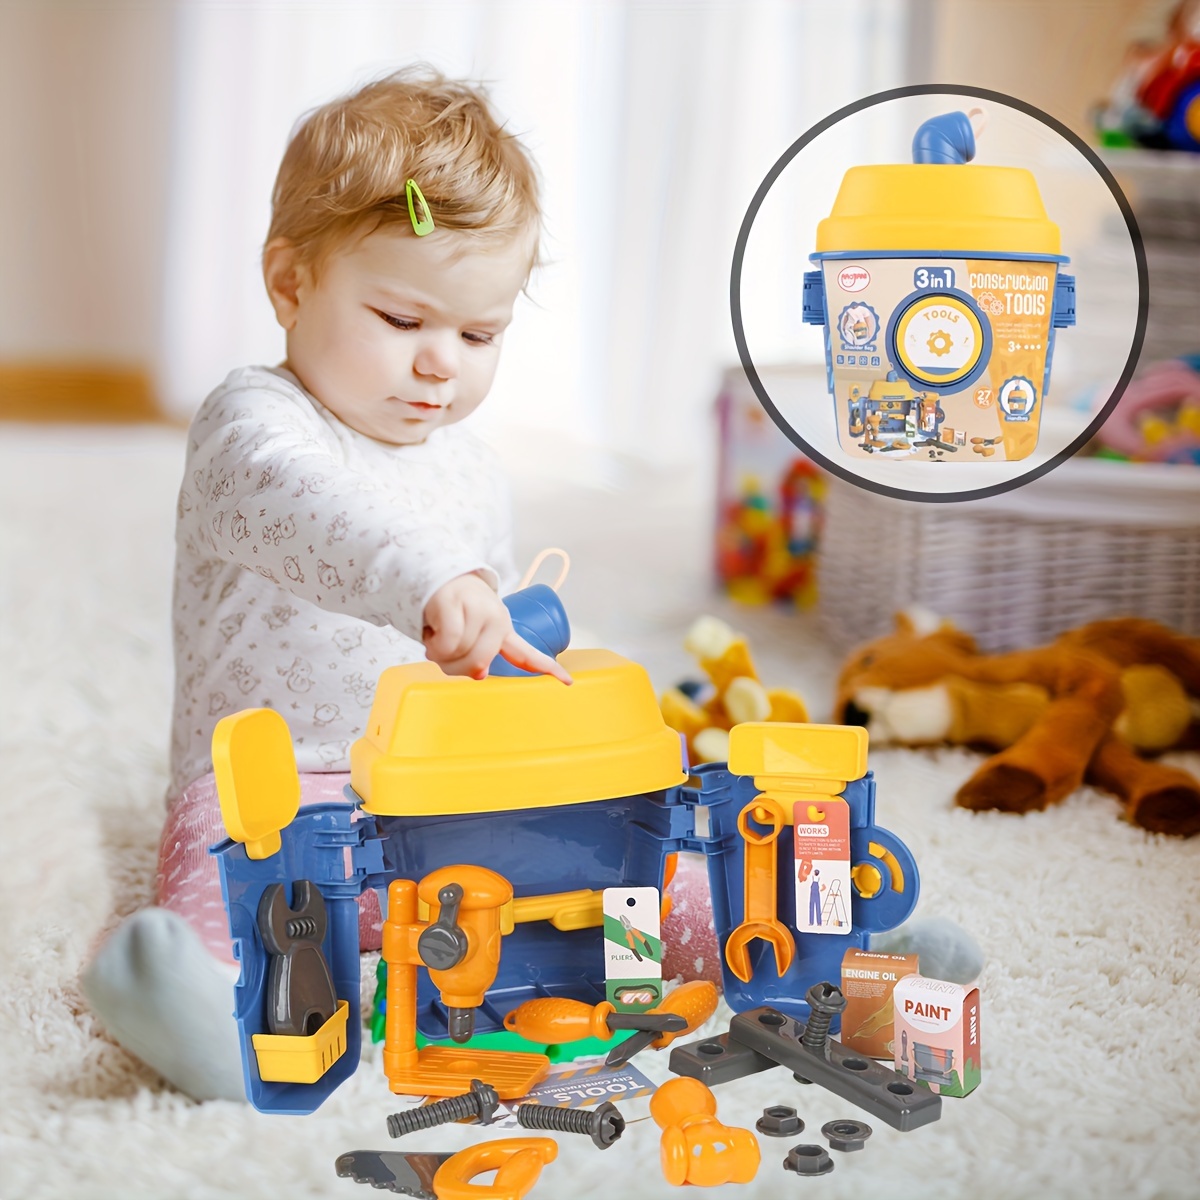 Toy Tools for Toddlers - Realistic Toy Tools! - Real Estate Kier